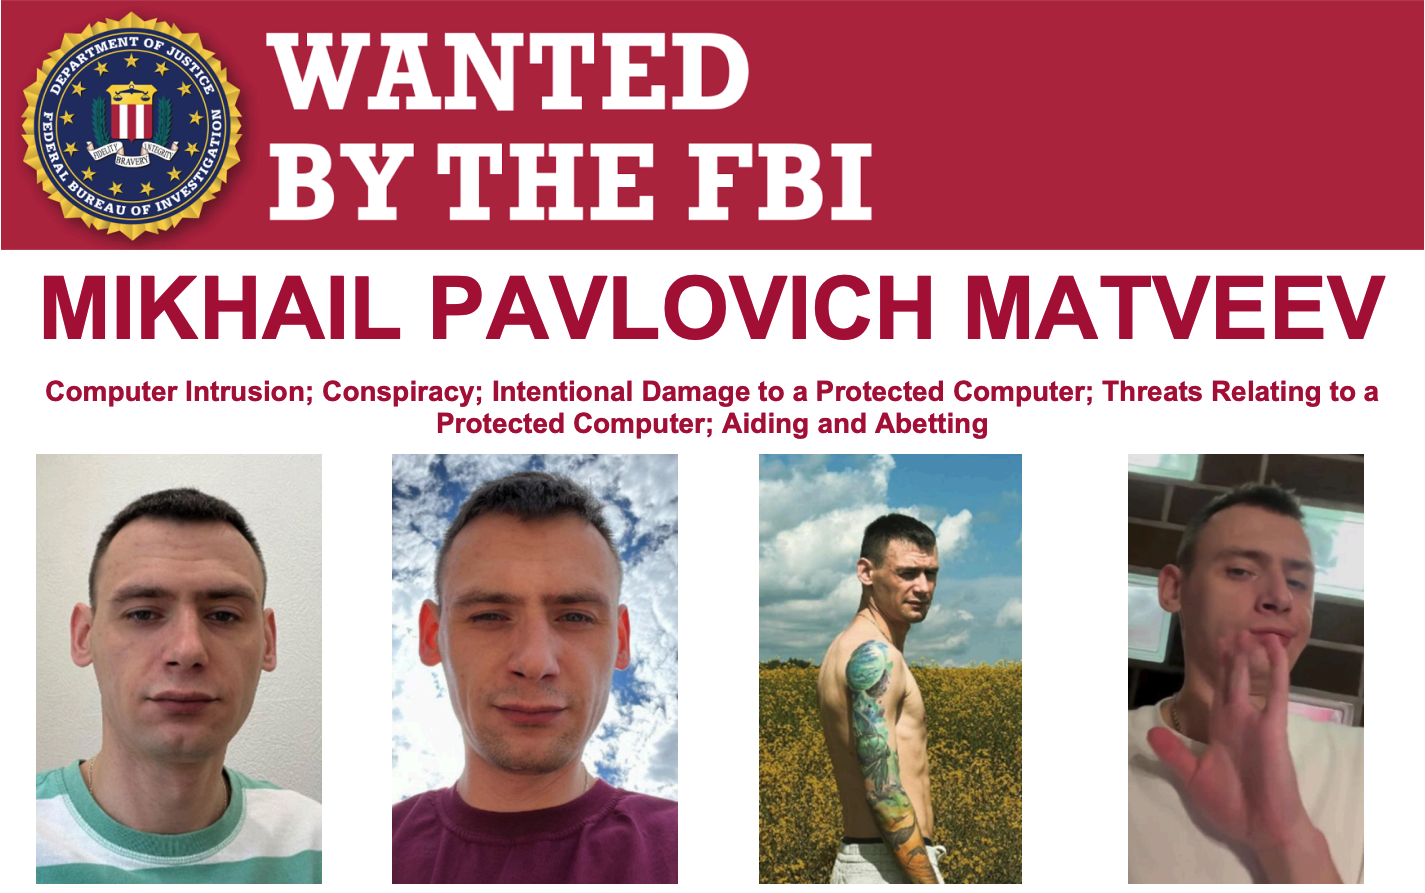 The FBI's wanted poster for Mikhail Matveev.